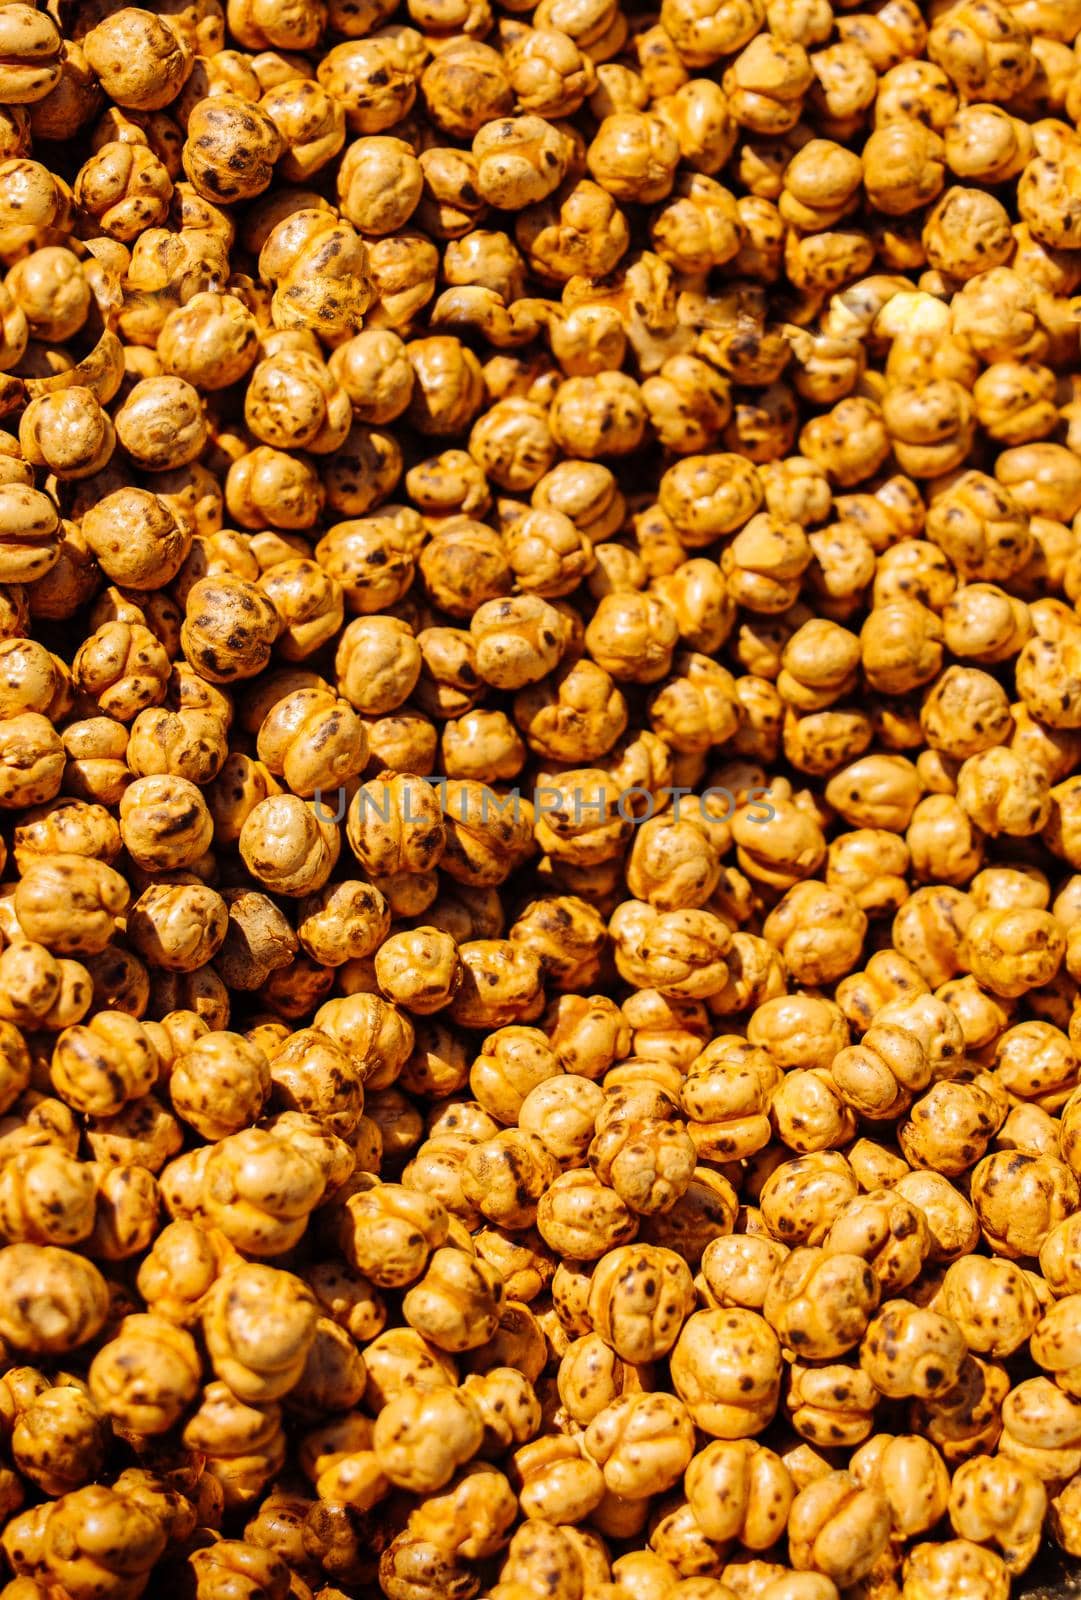 A pile of roasted chickpeas on display by berkay